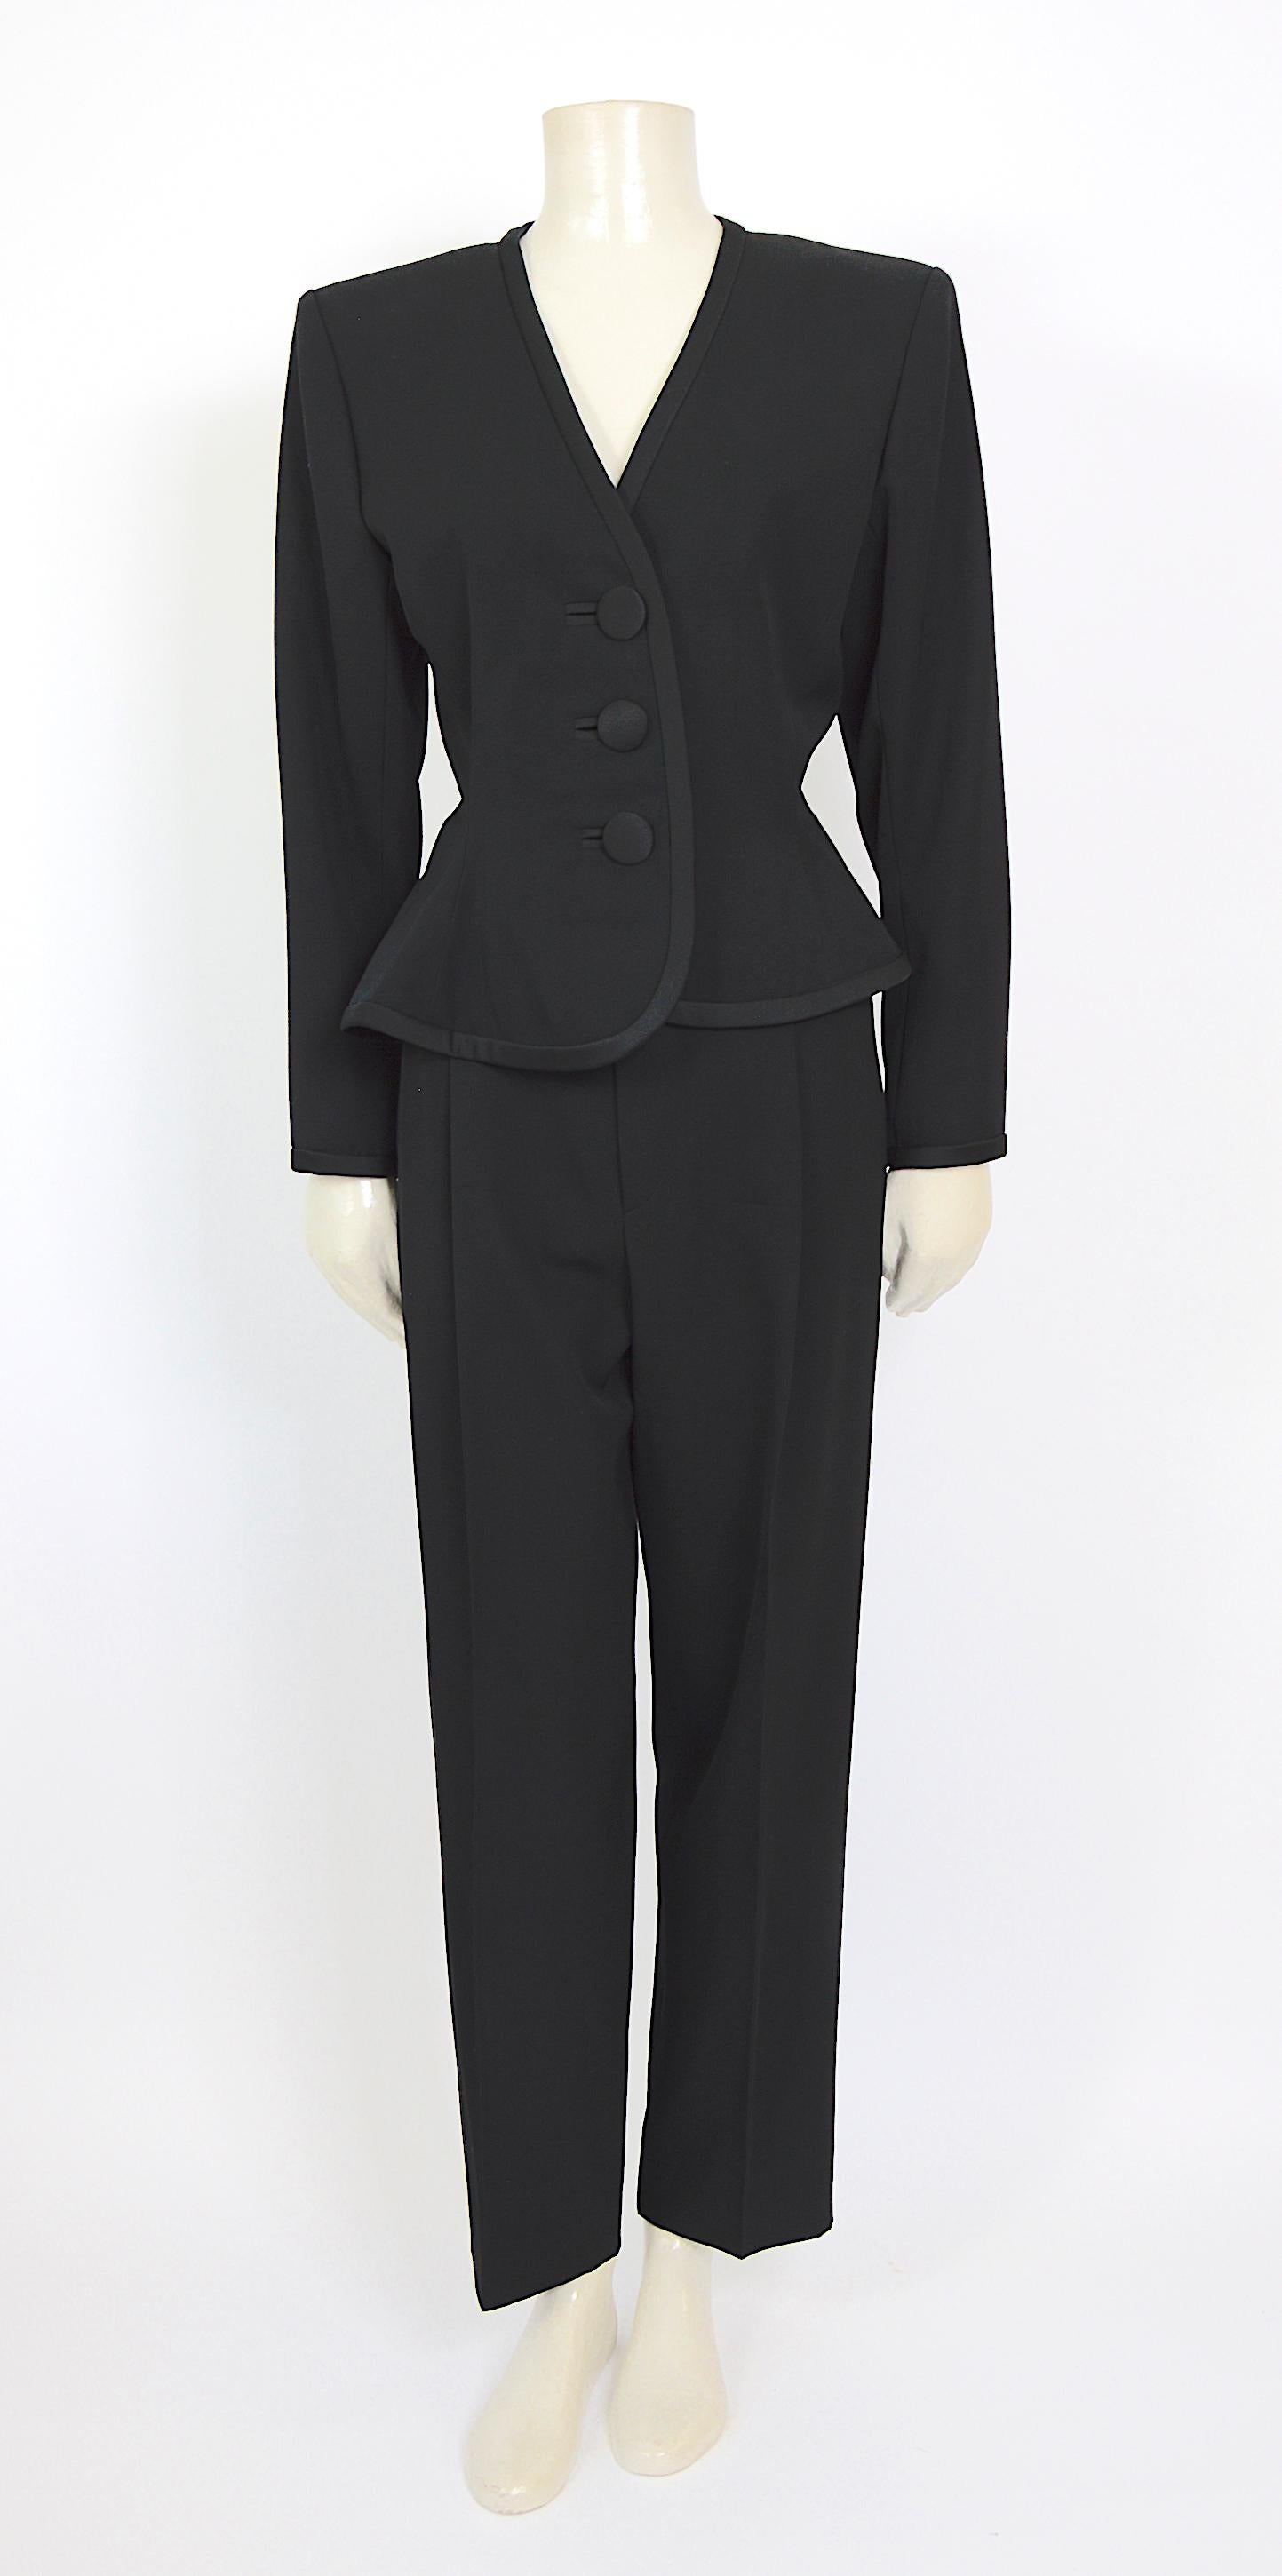 This vintage 1980s suit by Yves Saint Laurent, designed by Mr. Saint Laurent himself, is truly exceptional. It's a modern interpretation of the classic smoking suit, and the attention to detail is simply stunning.
Crafted from high-quality wool and